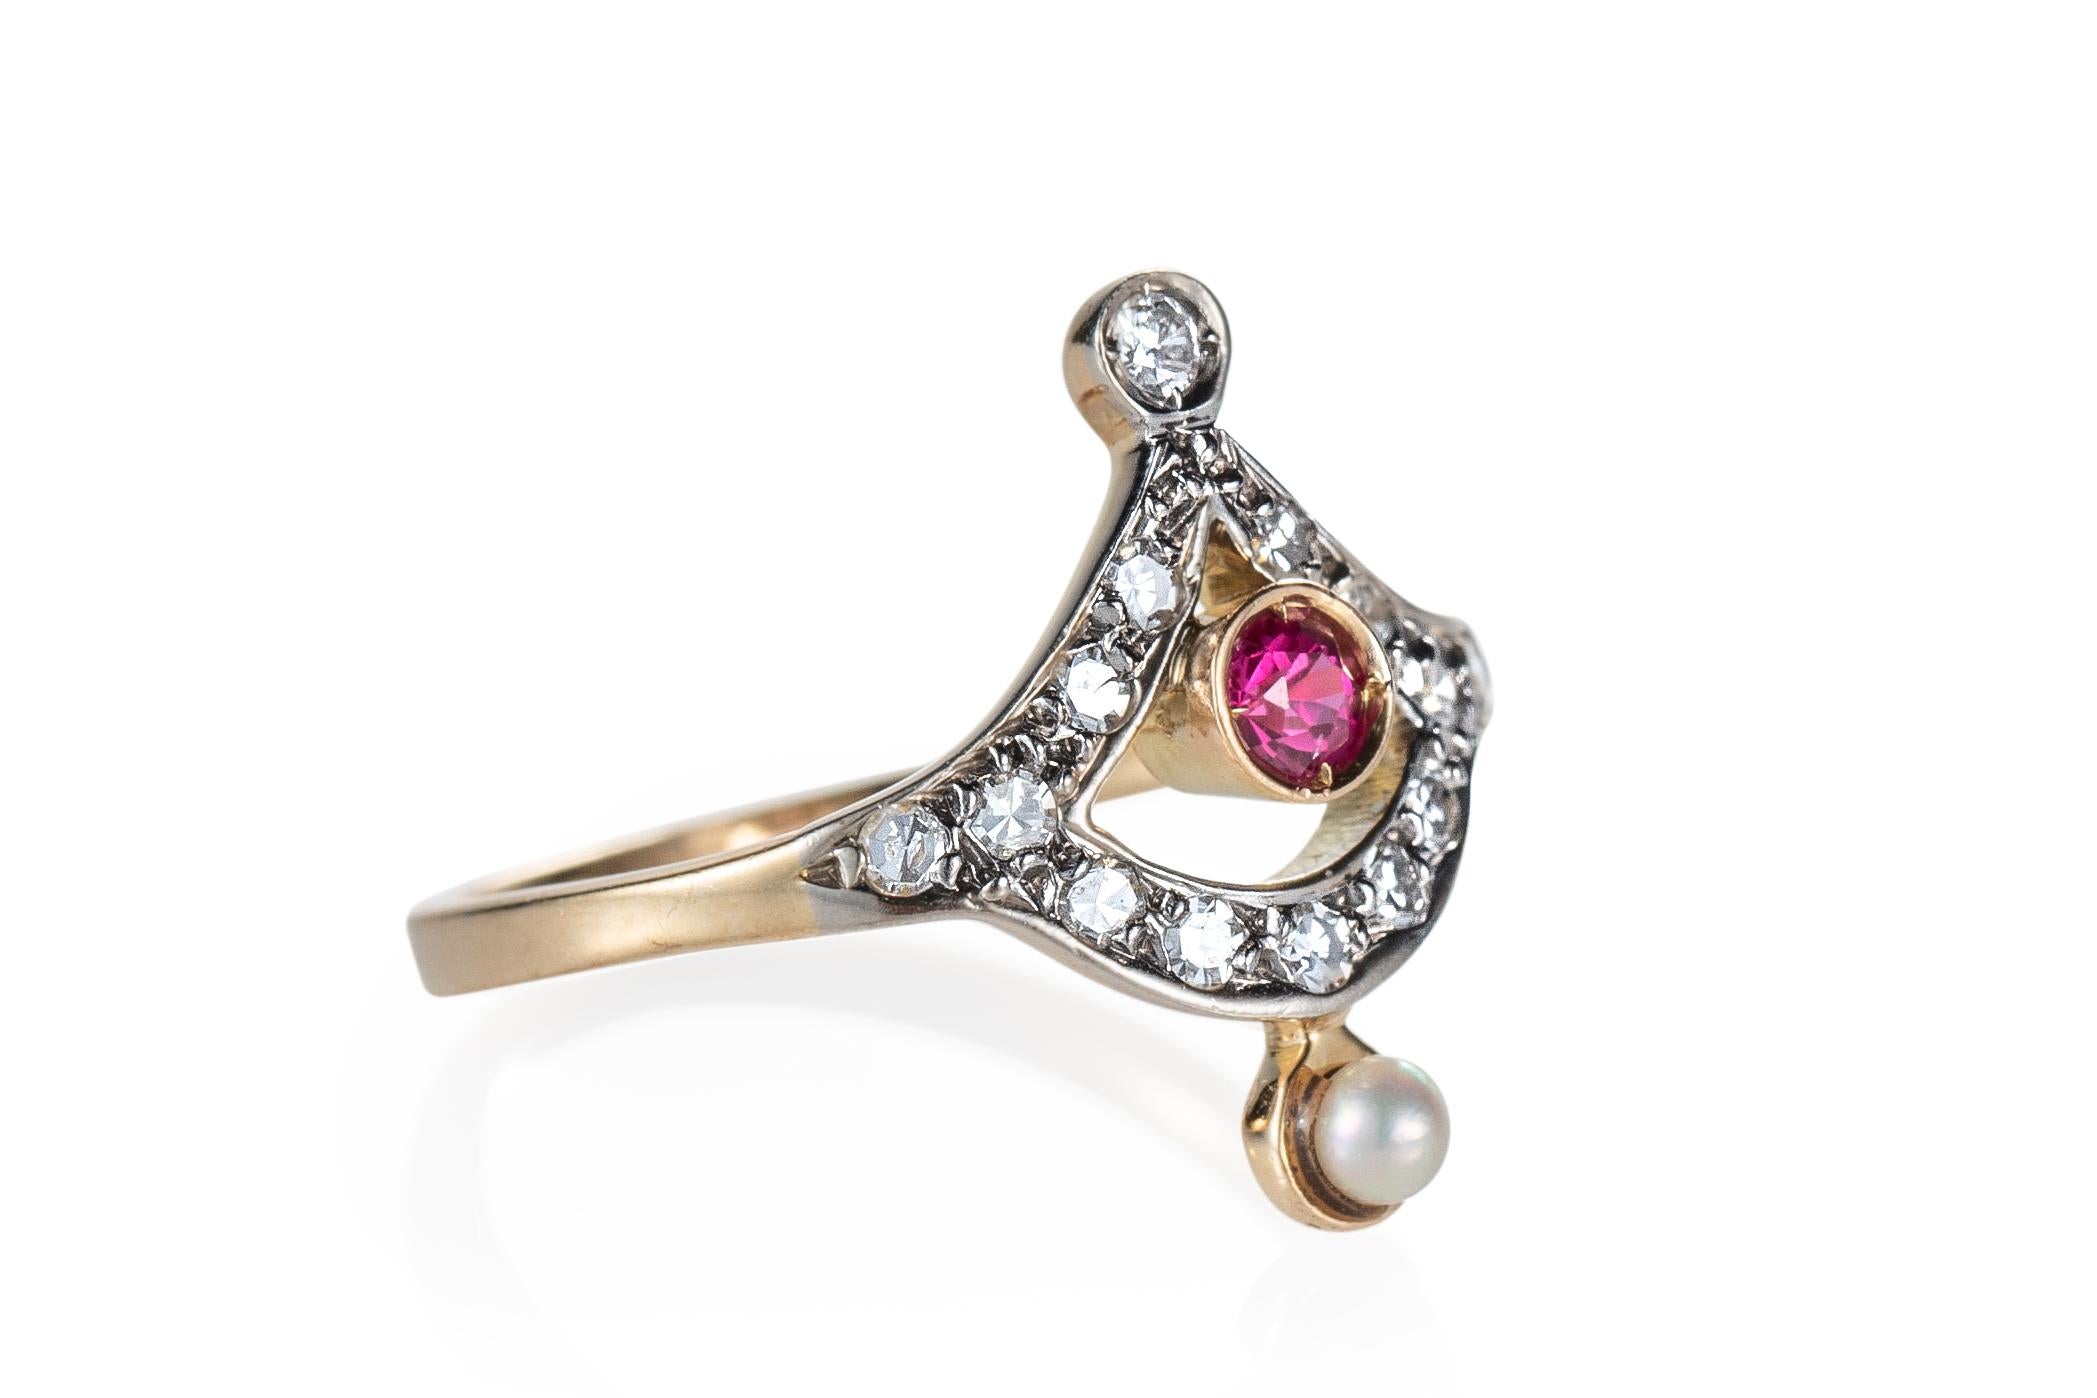 Item Details:
Metal Type: 18 Karat Rose Gold with Platinum Top
Weight: 3 grams 
Ring Size: 4.5 (Resizable)

Diamond Details:
Cut: Single cut
Carat: .15 Carat Total
Color: G-I
Clarity: VS-SI

Features:
A Pearl accent on top and a Ruby-like stone